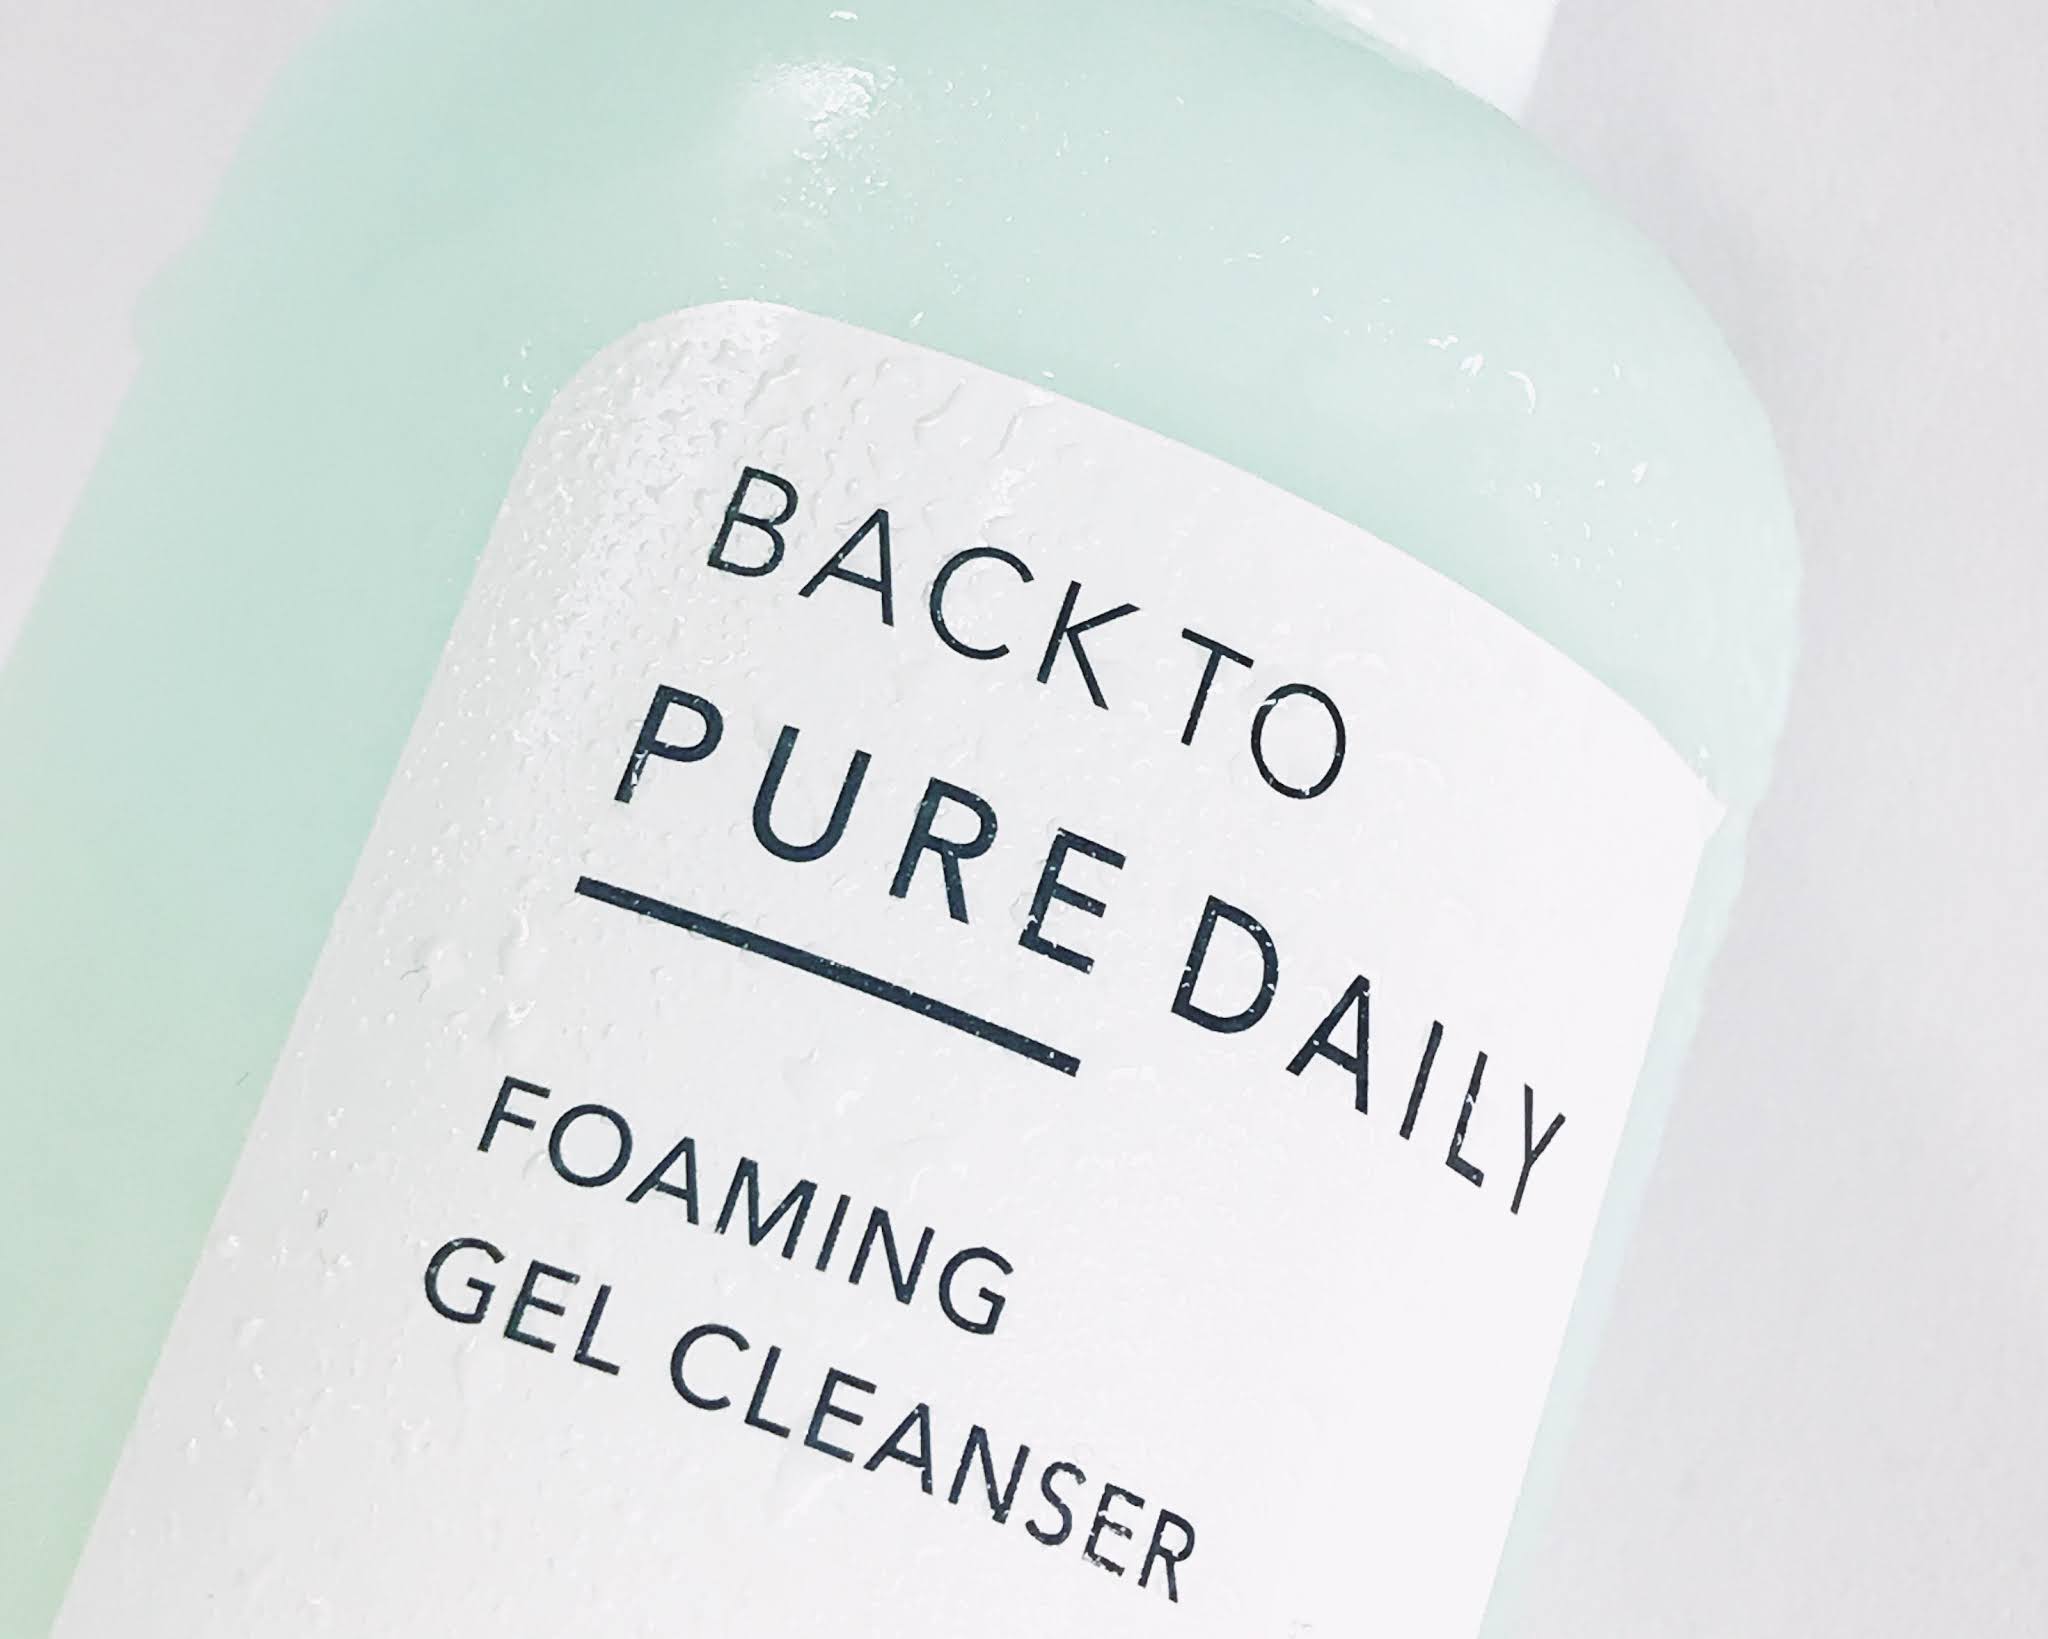 Back to Pure Daily Foaming Gel Cleanser. Thank you Farmer пилинг скатка. Soskin Foaming Cleansing Gel. Pure Cleansing Gel. Foaming gel cleanser